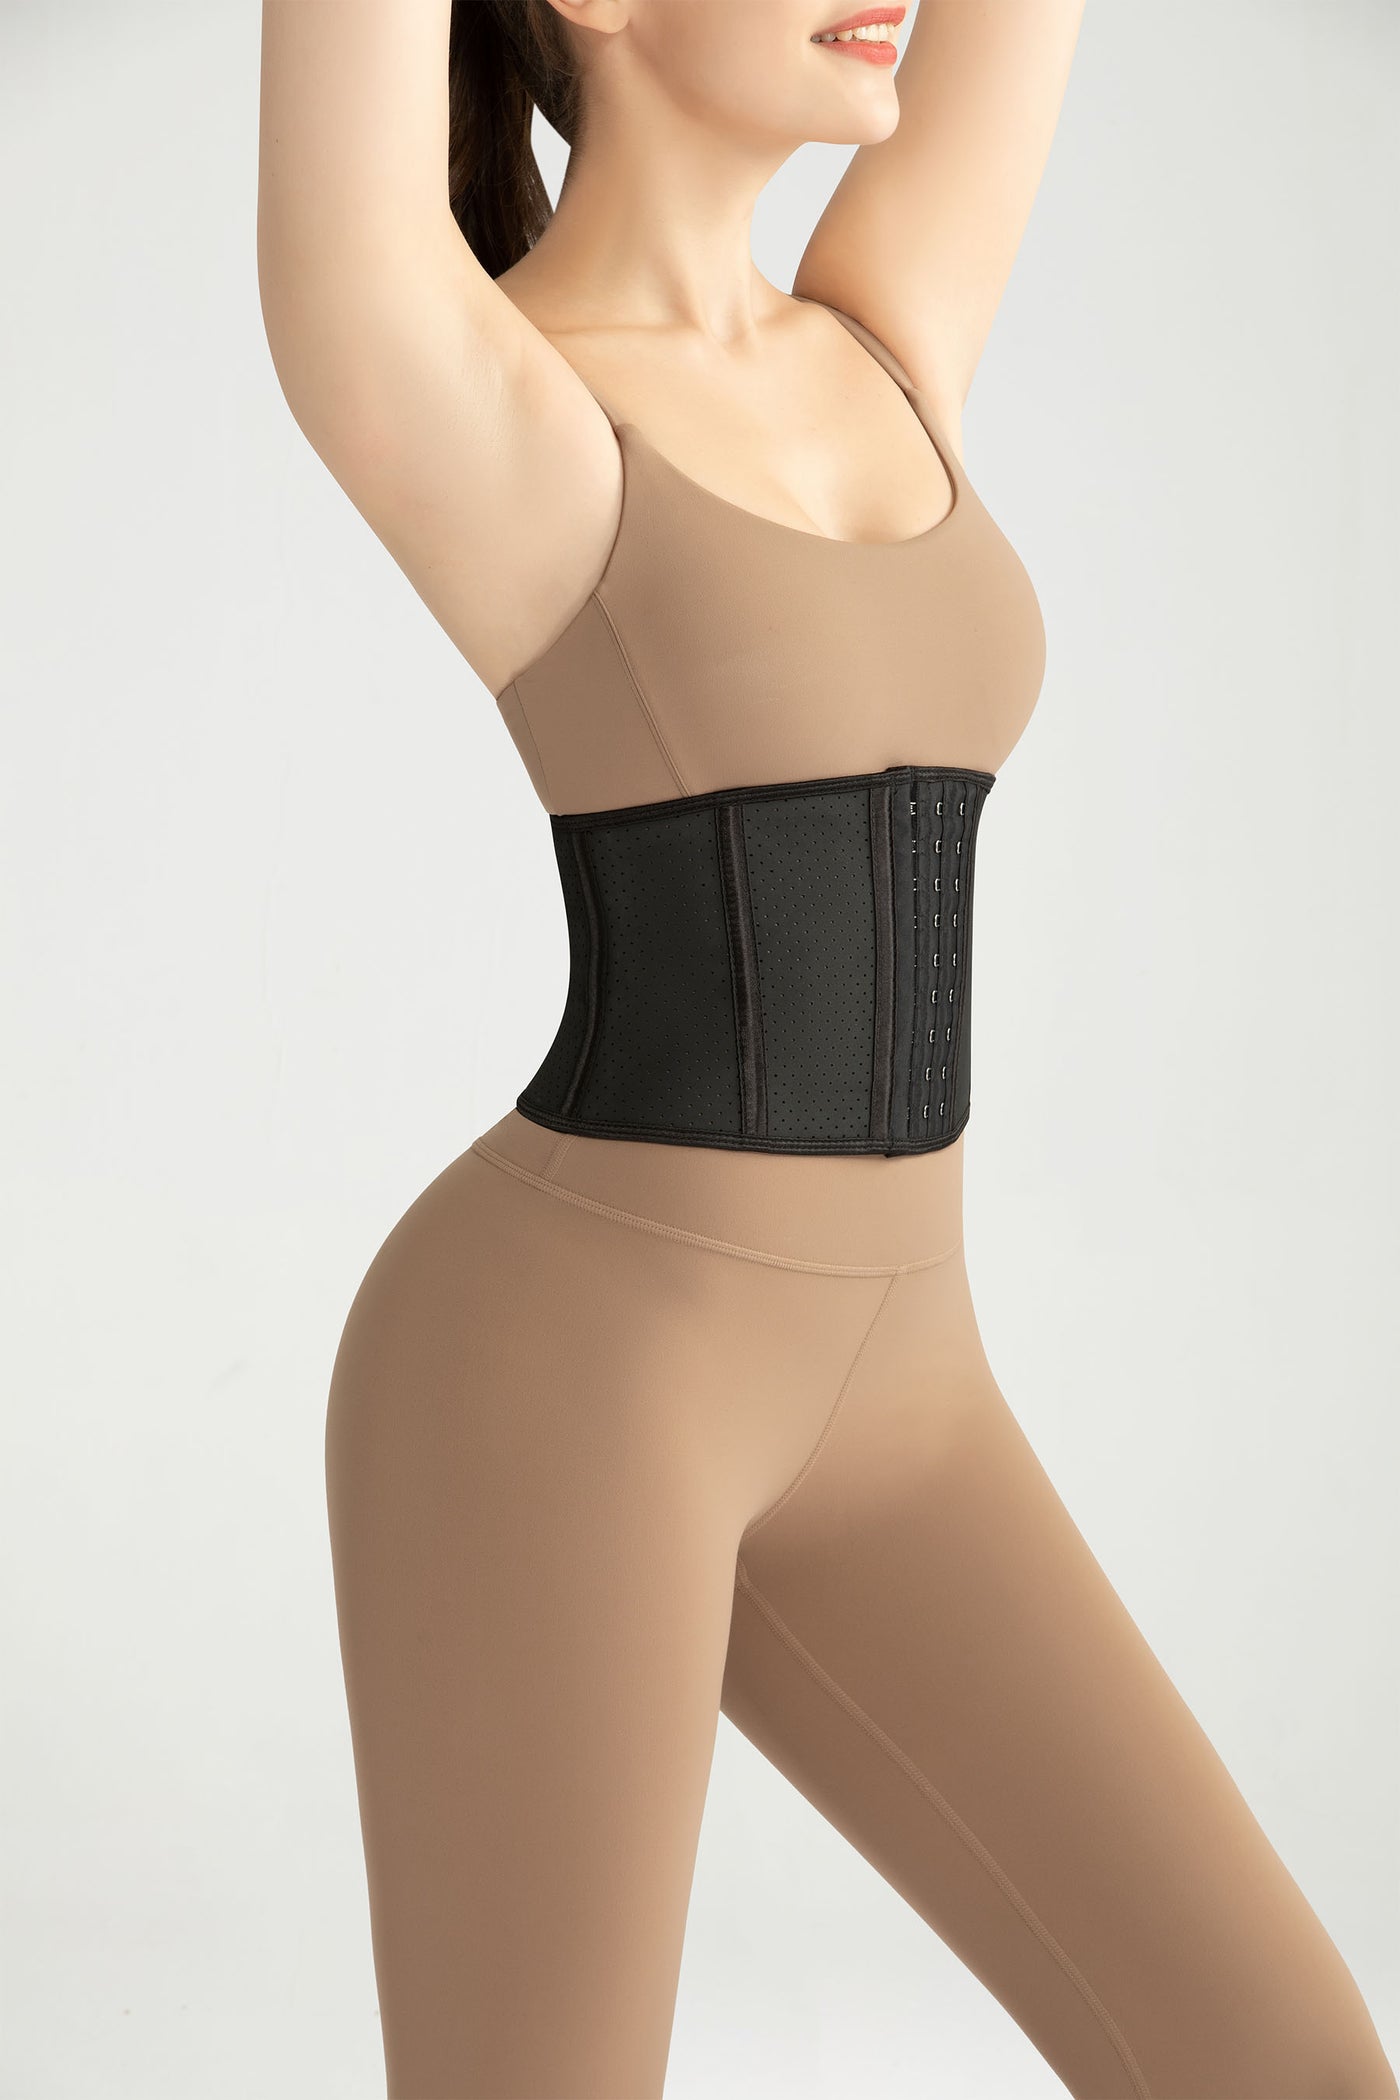 9 Inches Breathable Short Torso Waist Trainer